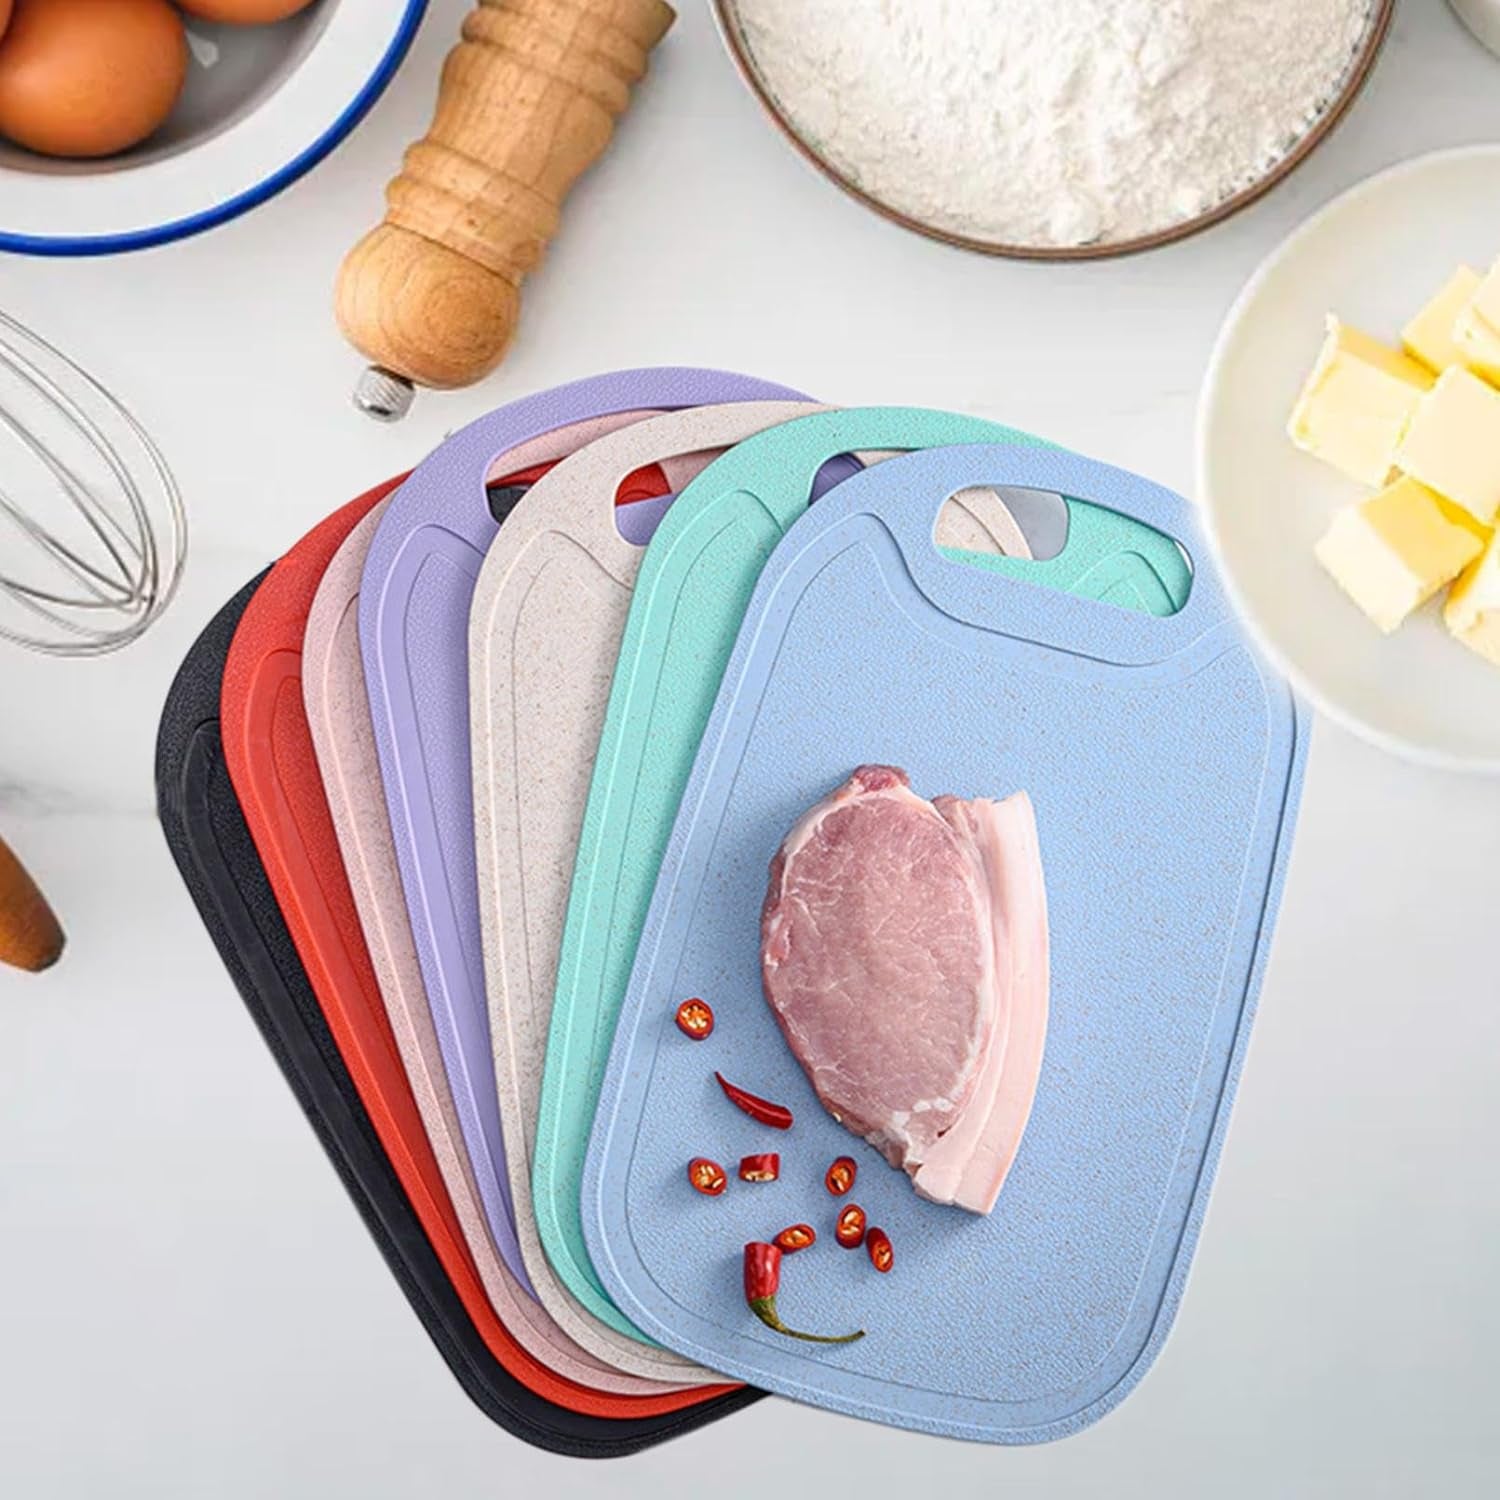 Plastic Cutting Boards for Kitchen Overstock Outlet Dishwasher Safe Double-Sided Design Meat Cutting Board Cutting Board for Meat Easy Grip Handle Non-Slip with Grinding Area Chopping Board  Deal Of The Day Prime Today Only Blue  